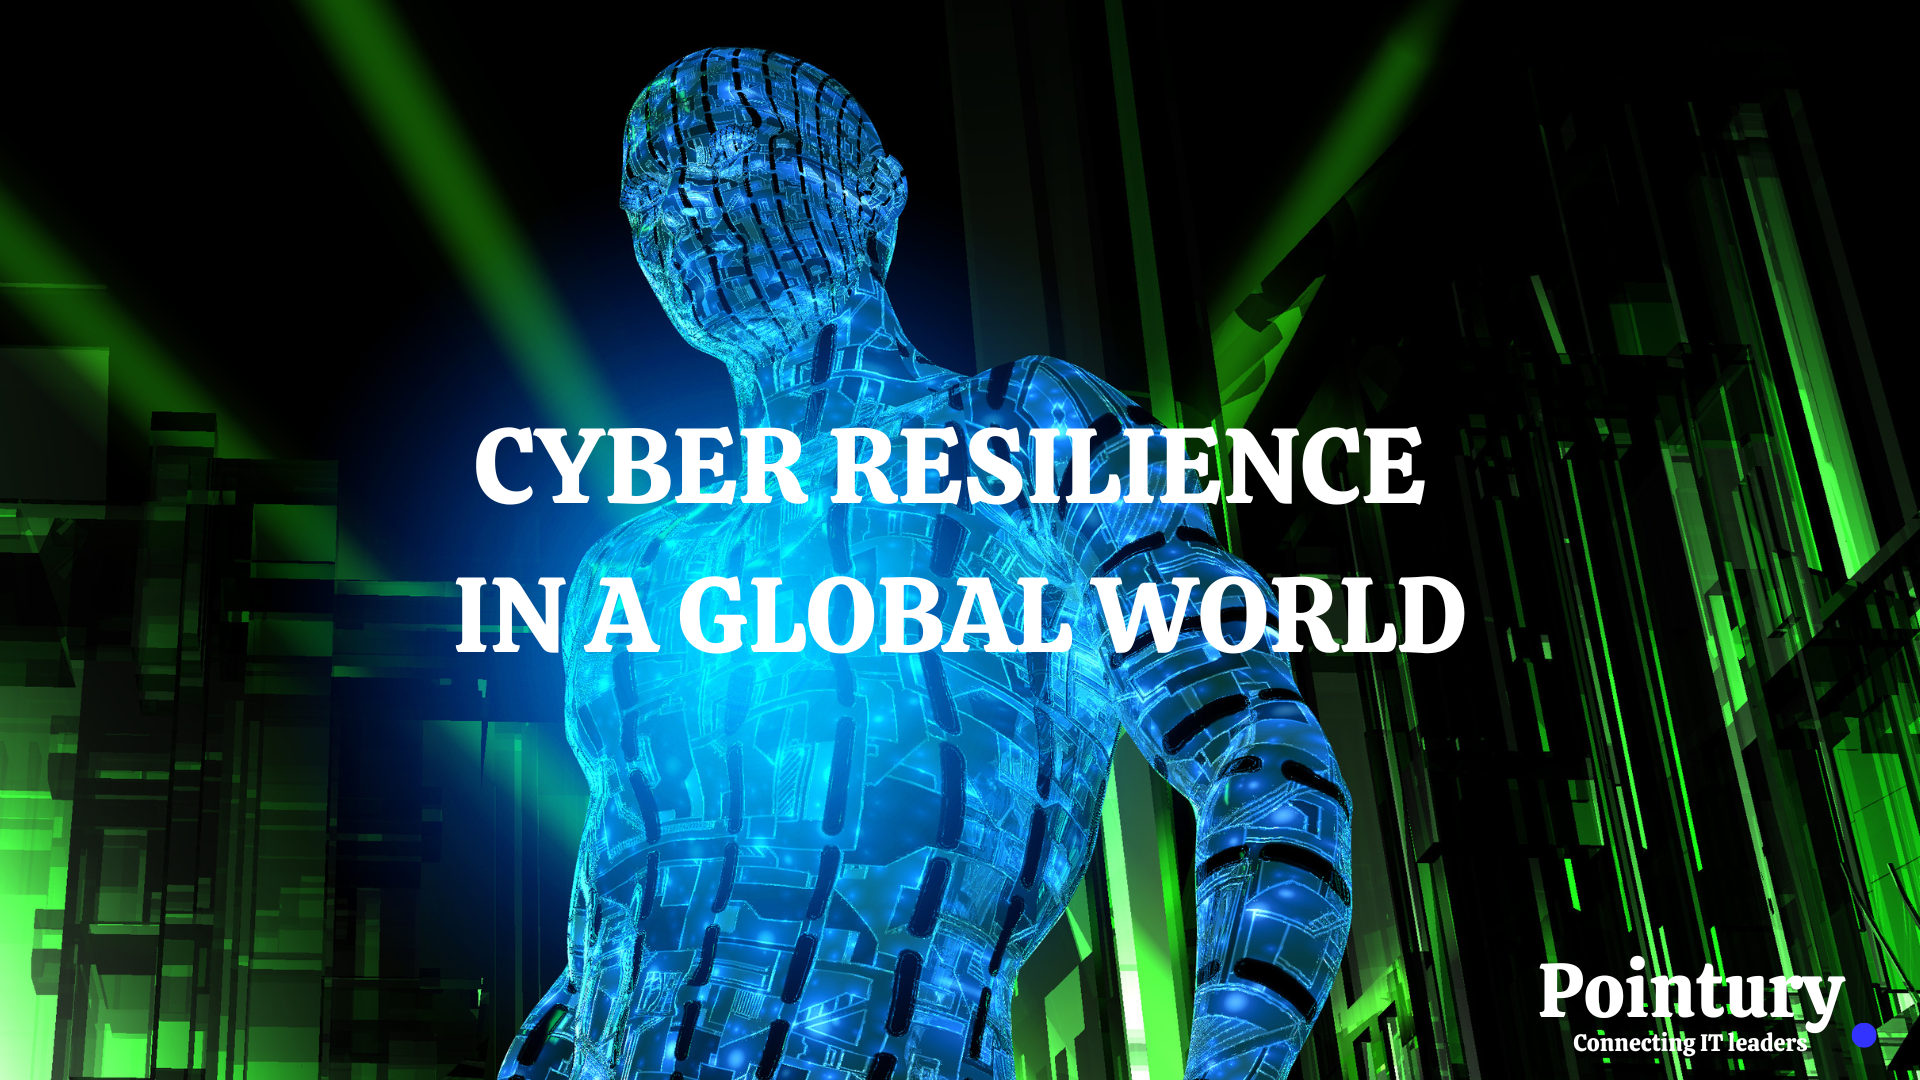 CYBER RESILIENCE